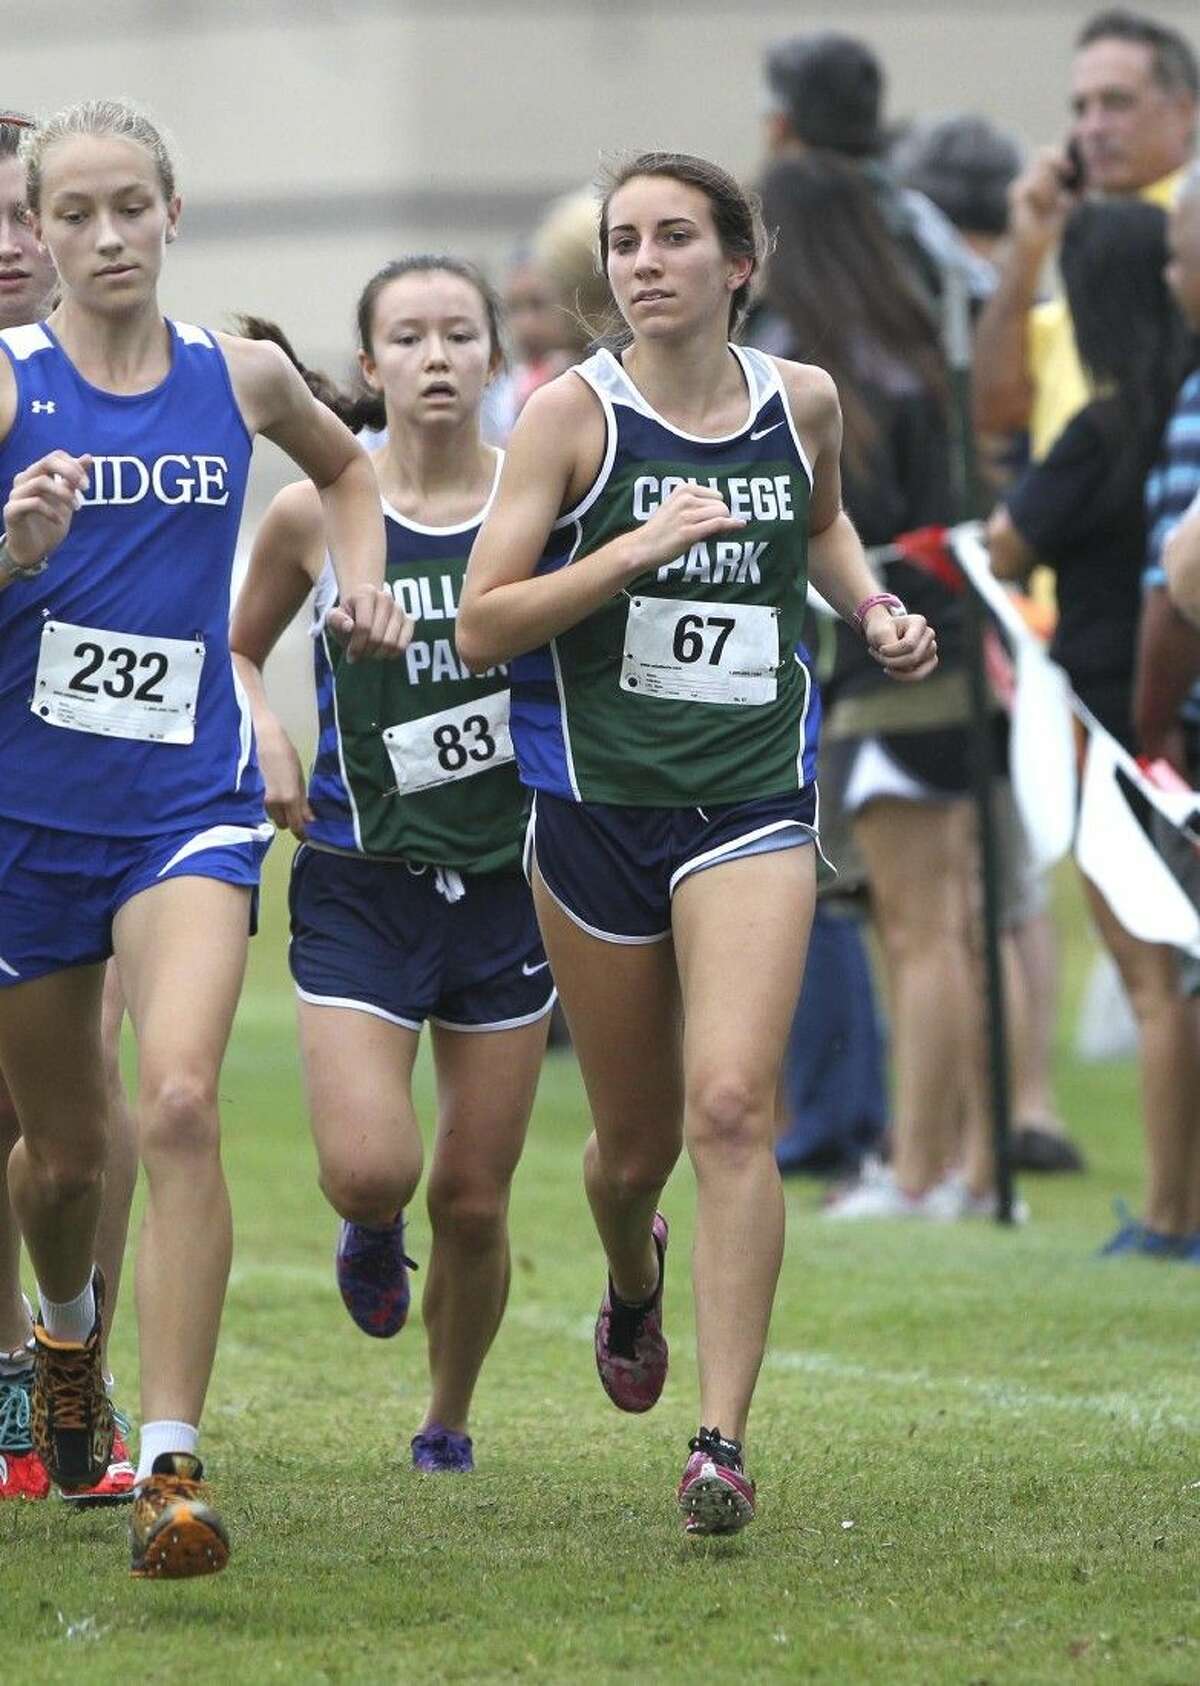 College Park’s Camila Cortina, pictured at the Oak Ridge Invitational on Sept. 13, finished second at the Brenham Hillacious Invitational on Saturday.